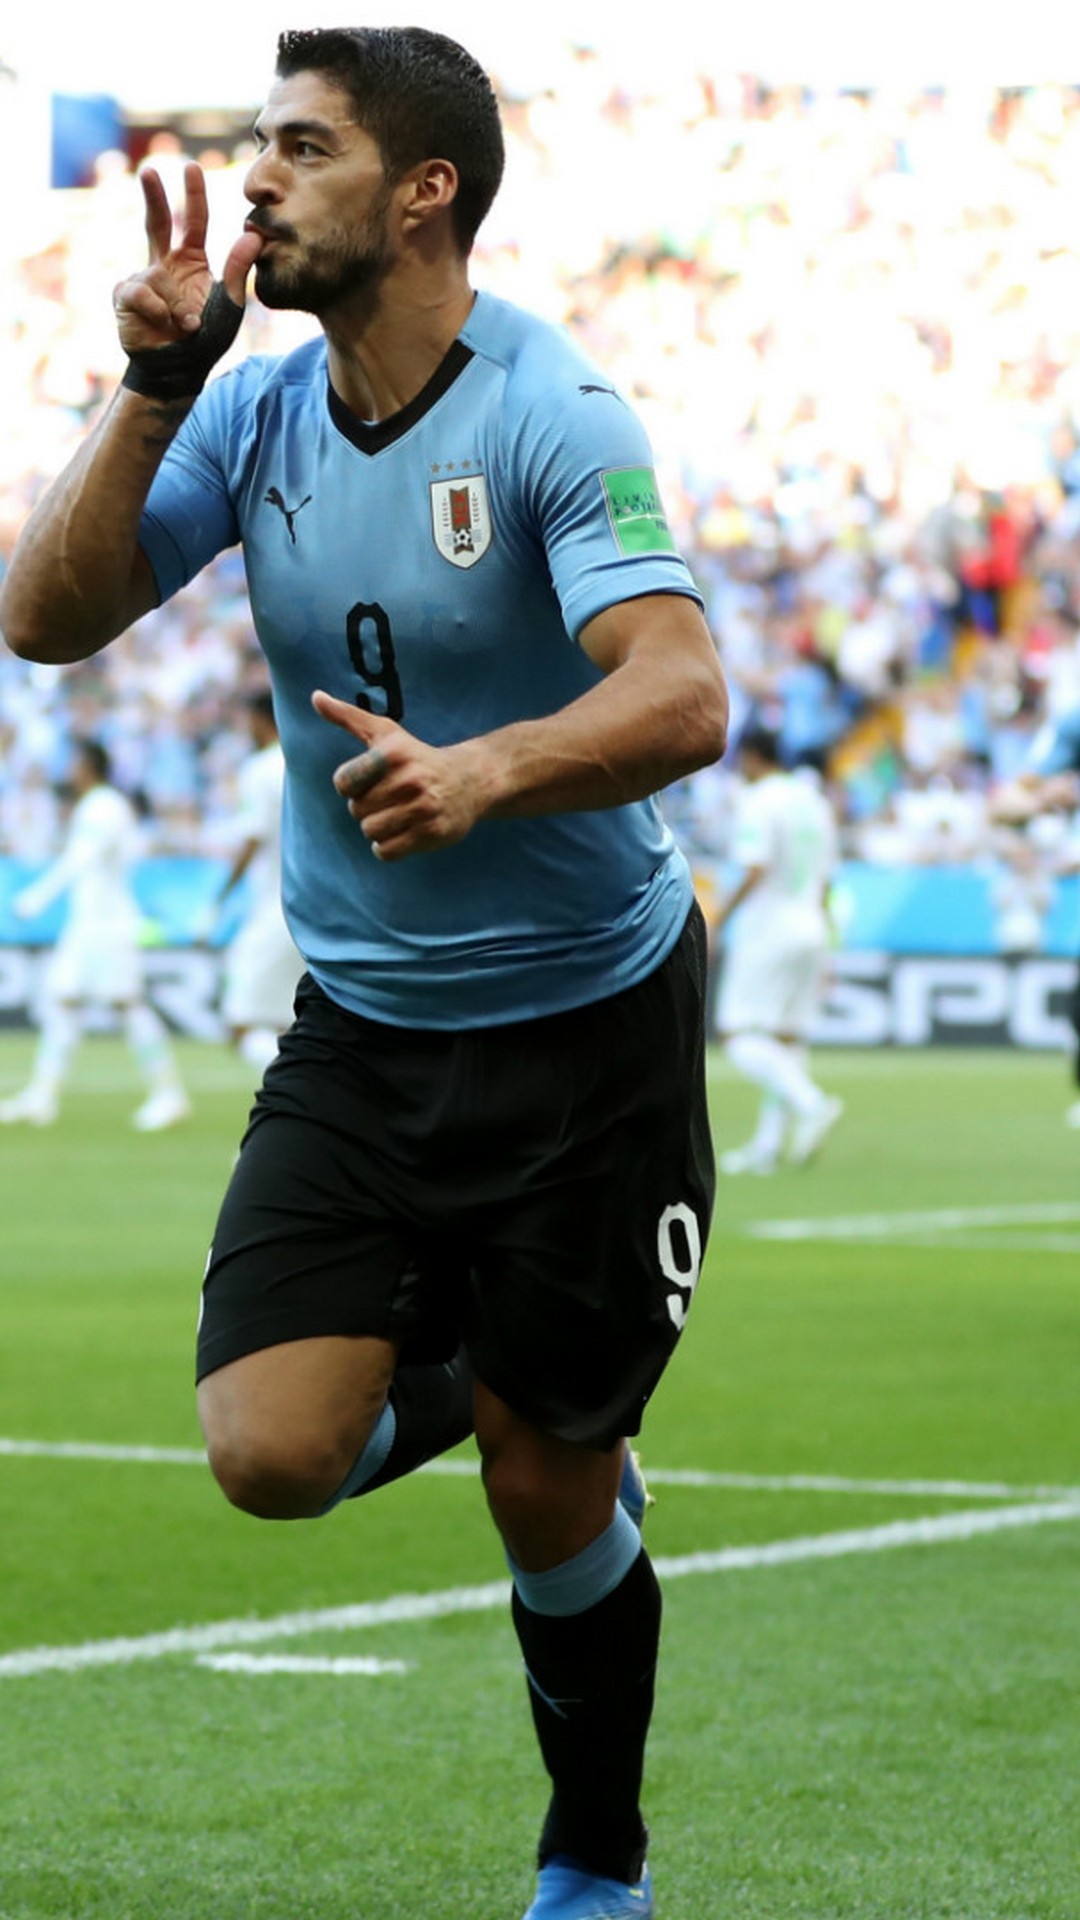 Wallpaper iPhone Luis Suarez Uruguay with image resolution 1080x1920 pixel. You can make this wallpaper for your iPhone 5, 6, 7, 8, X backgrounds, Mobile Screensaver, or iPad Lock Screen